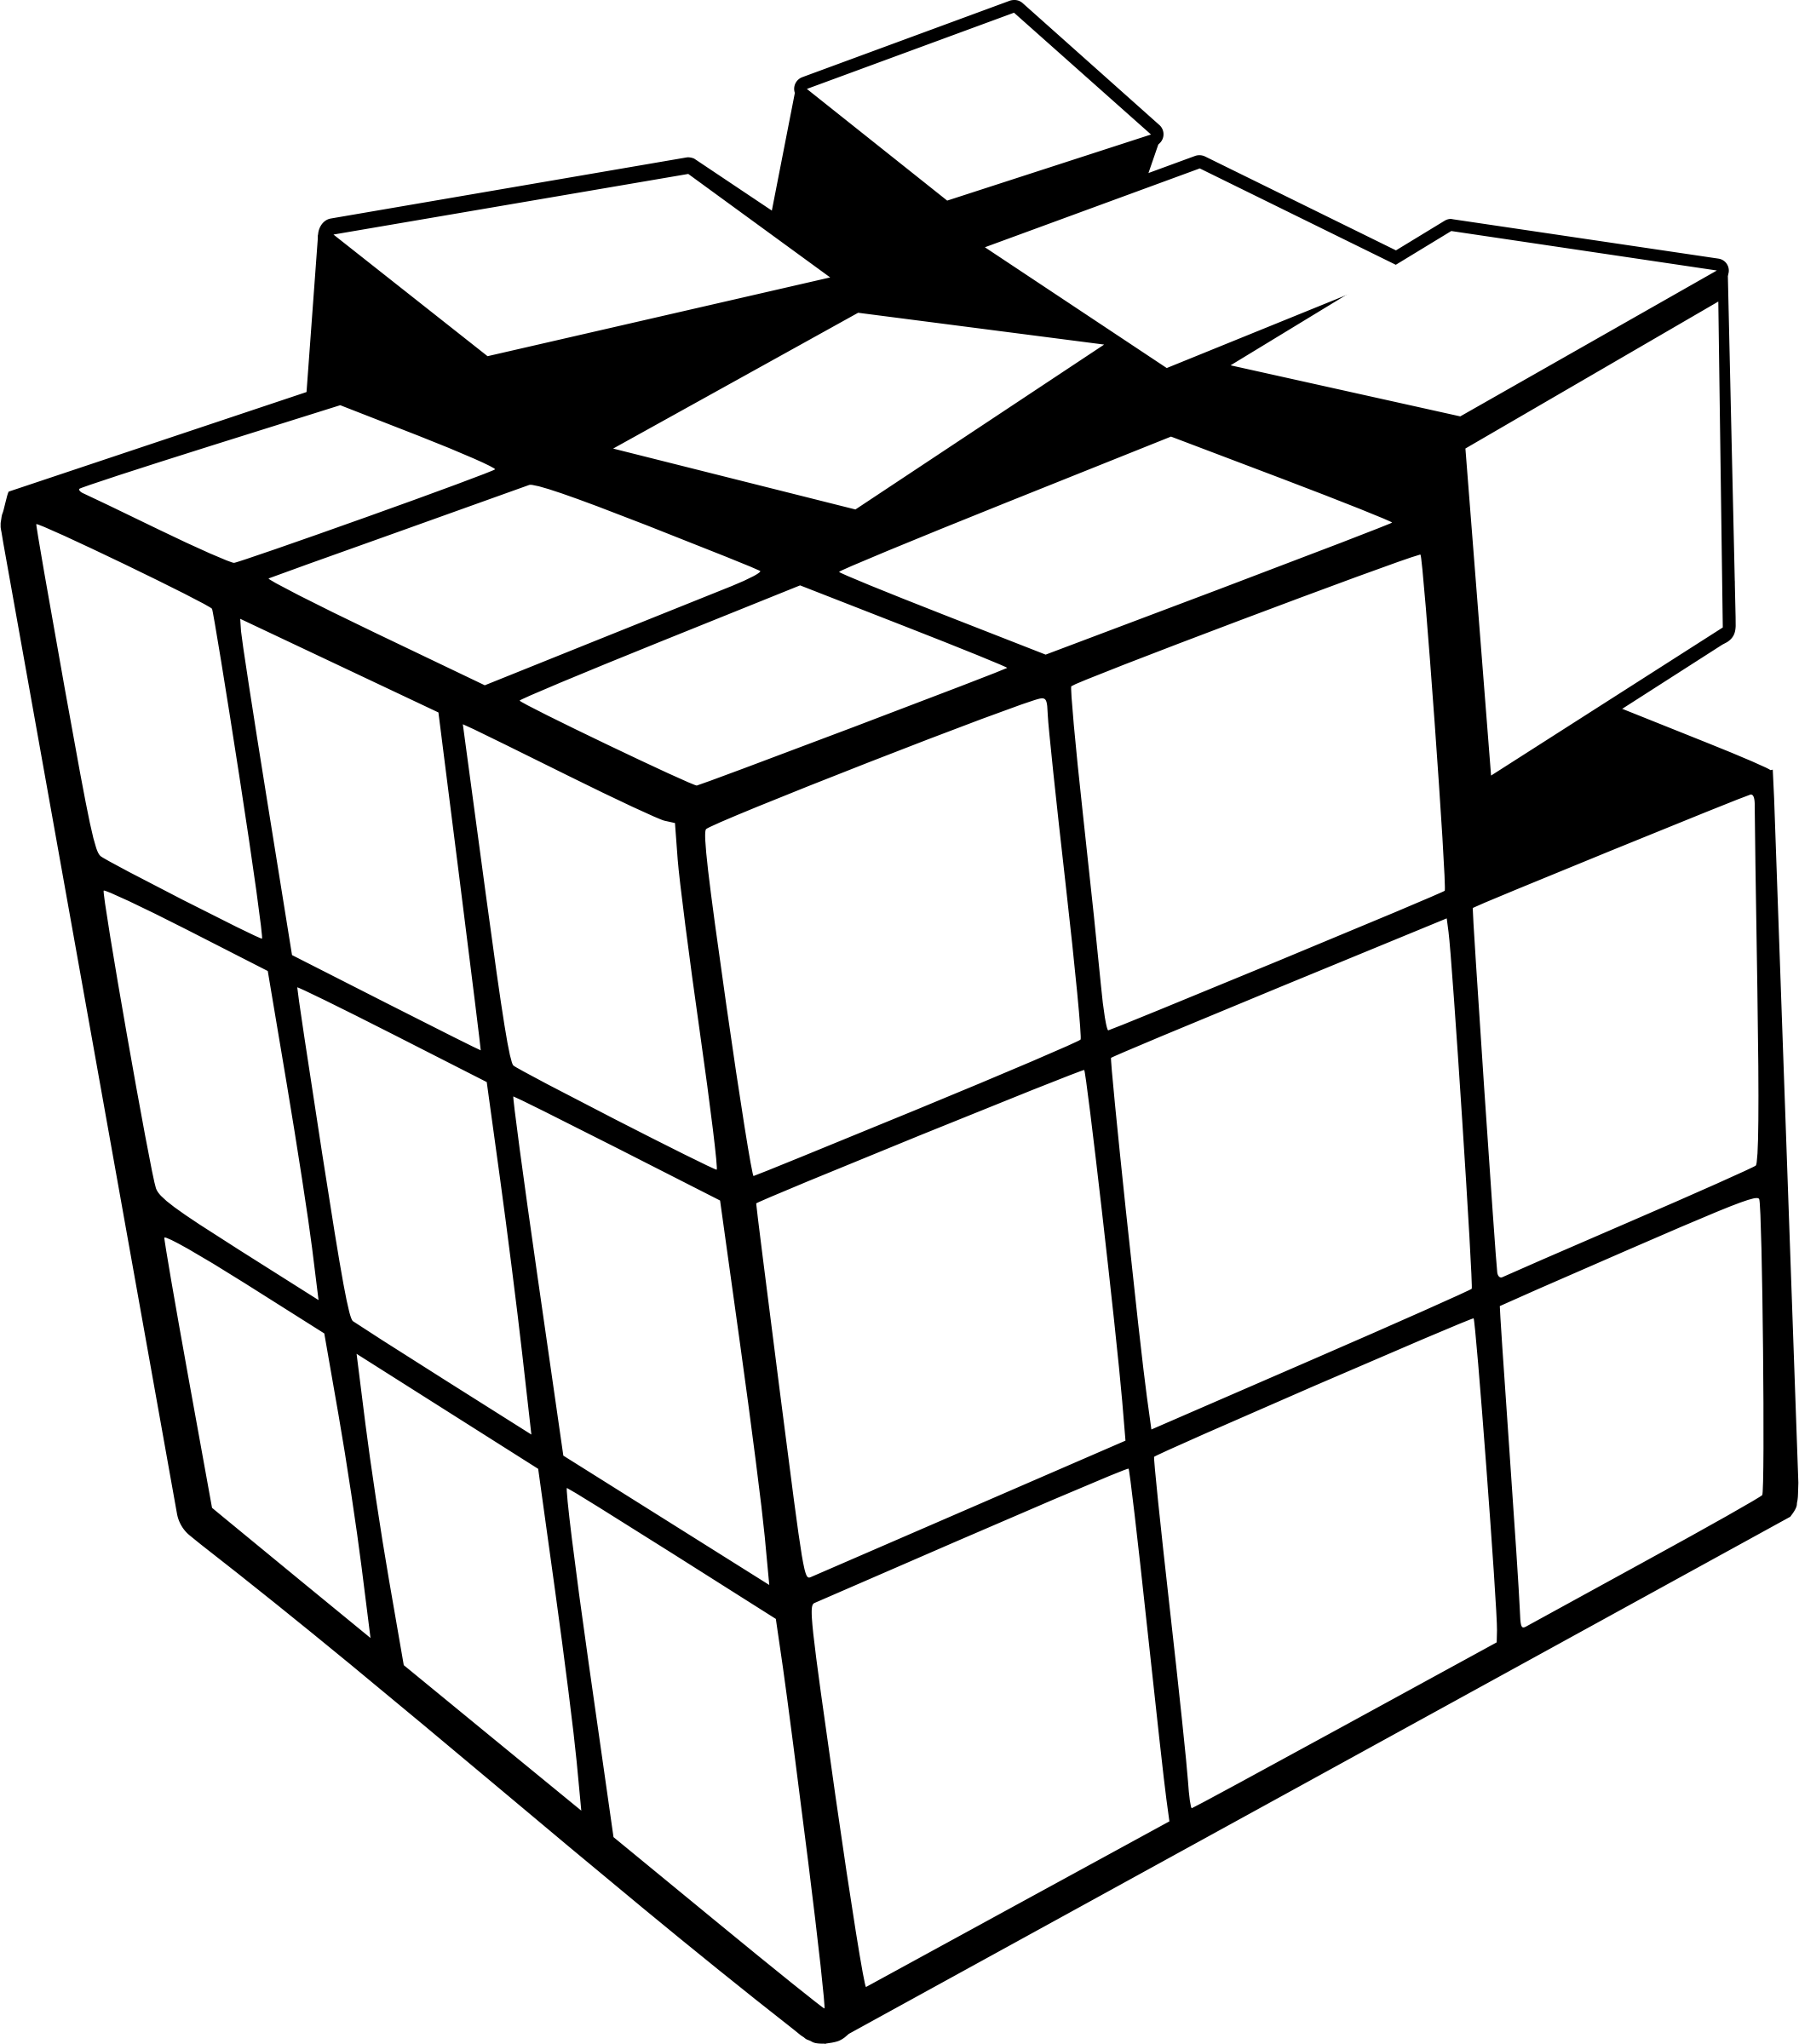 Cartoon Rubiks Cube Coloring Page for Kindergarten